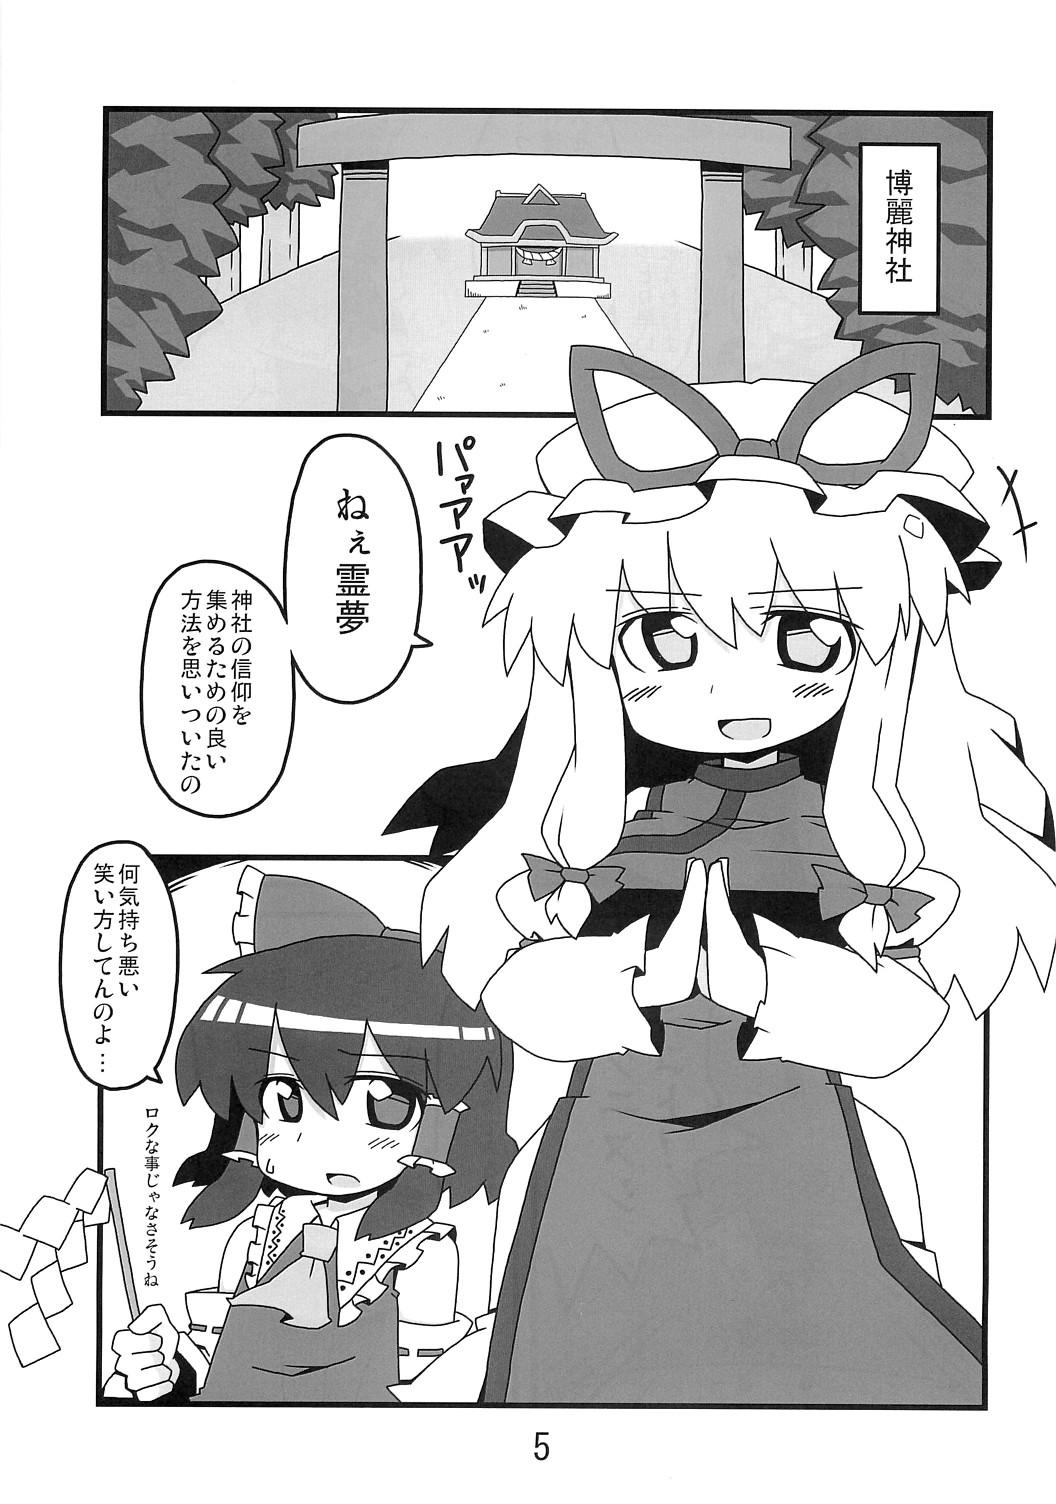 Game 東方豊年祭 - Touhou project Naija - Page 4